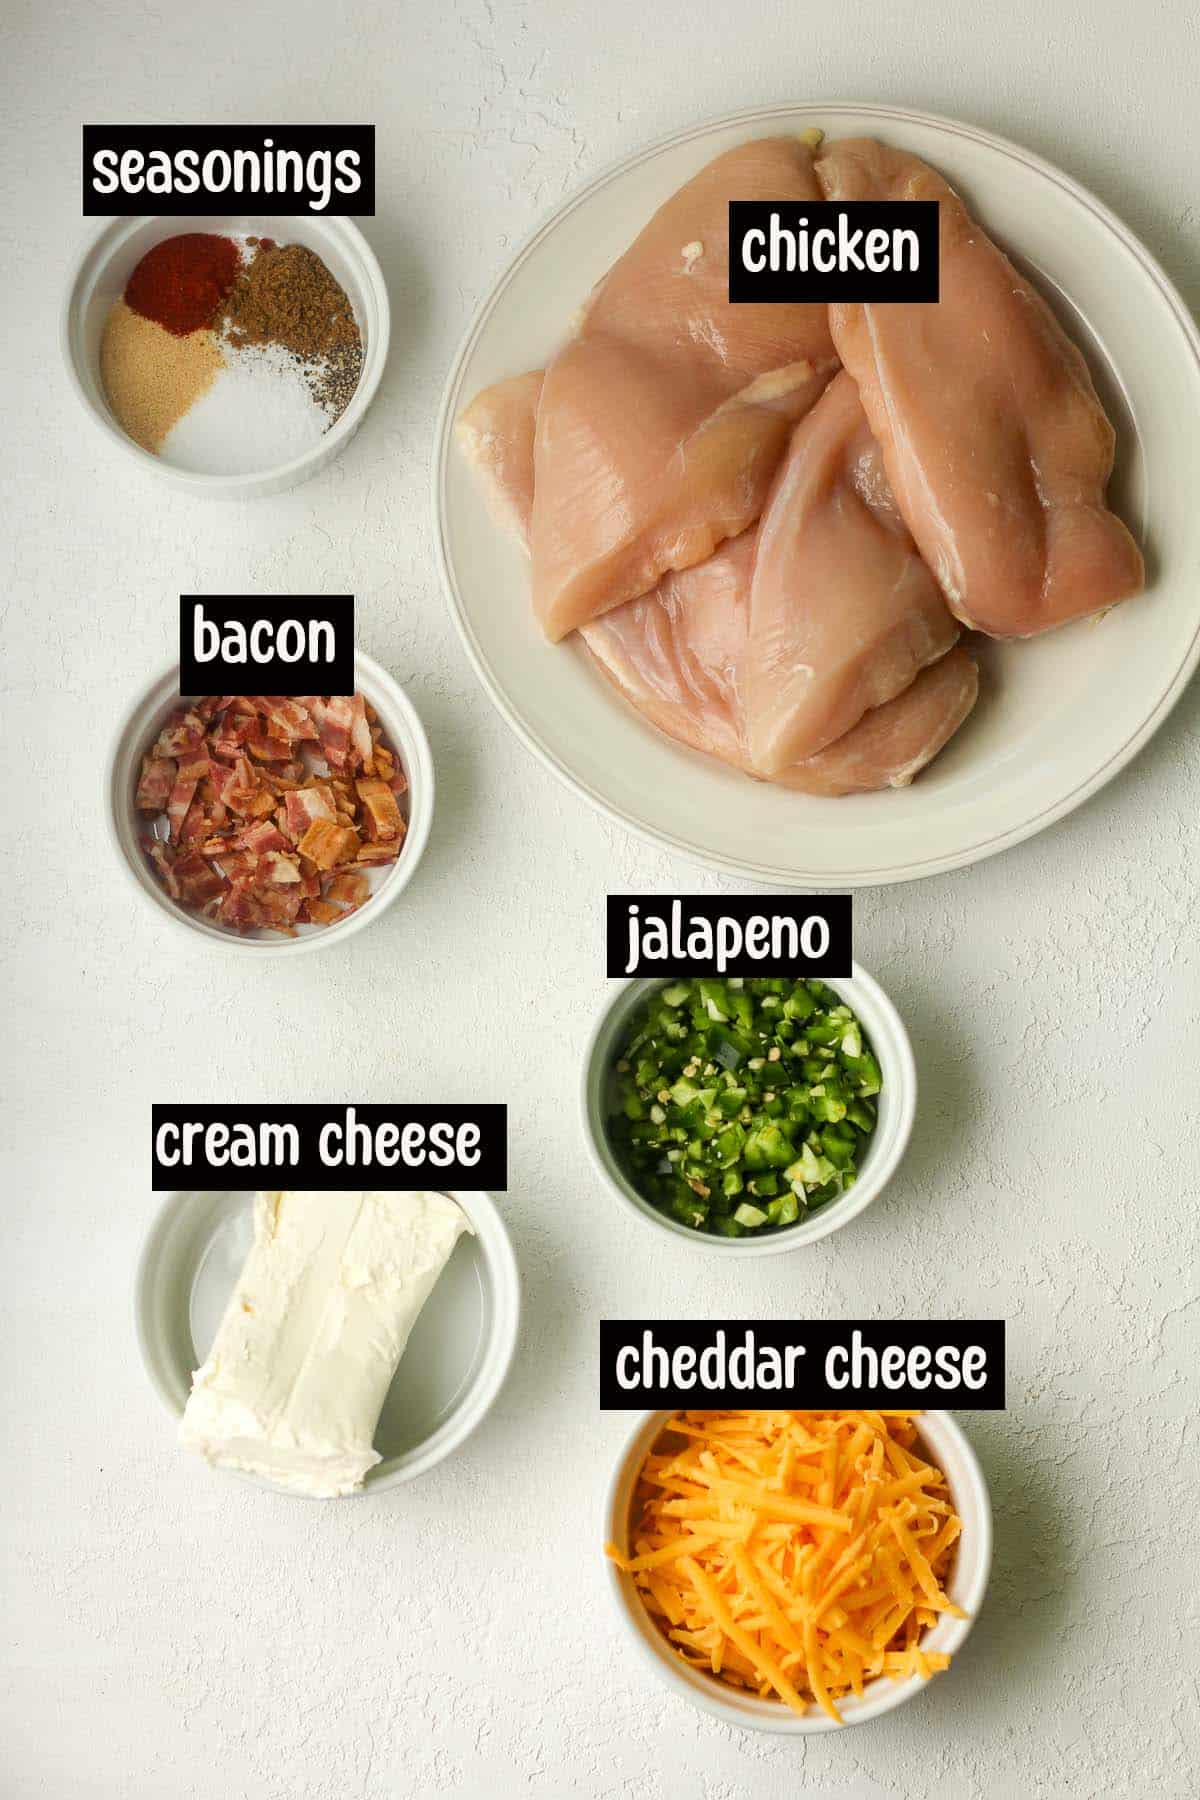 The labeled ingredients for the stuffed chicken.